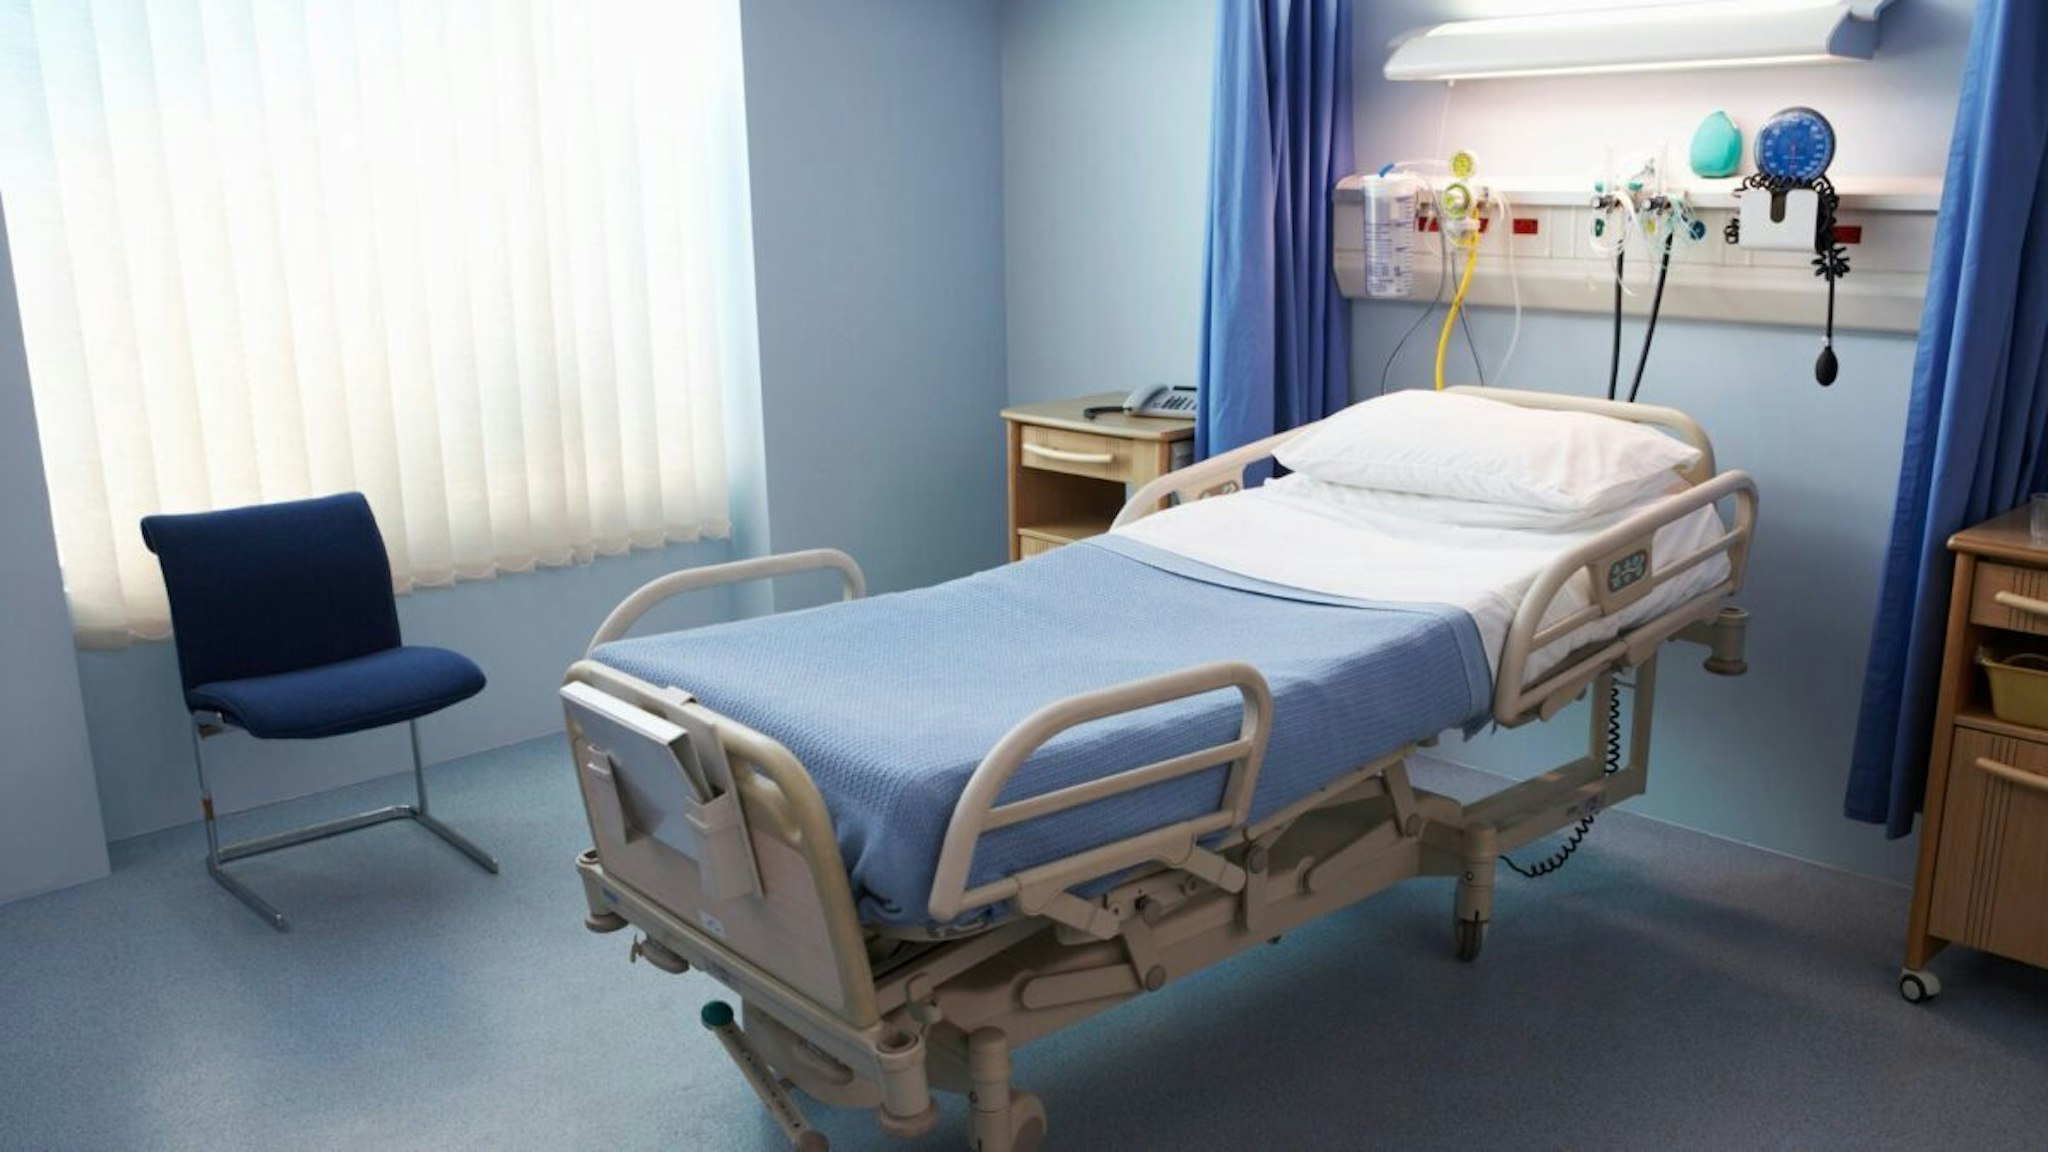 Empty Hospital Bed in a Ward - stock photo